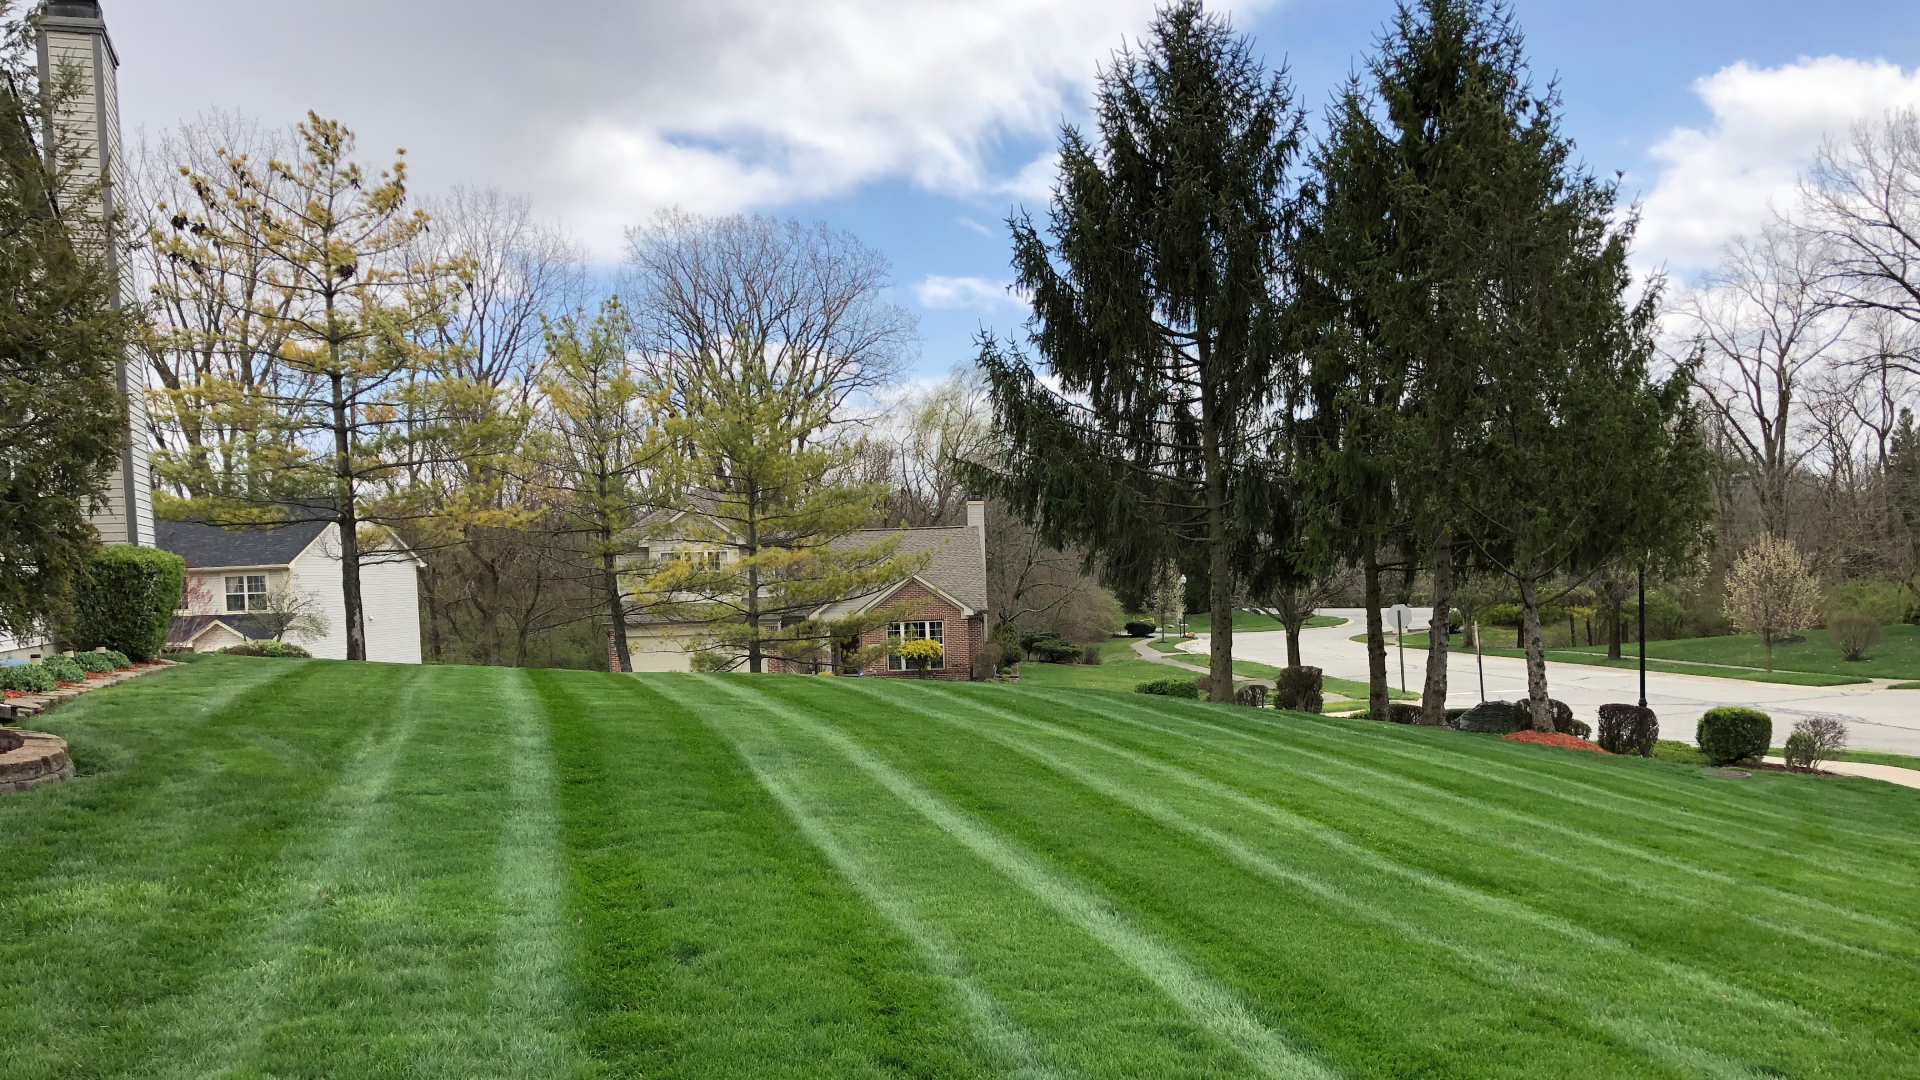 Mowed lawn with stripe patterns added in Meridian Hills, IN.